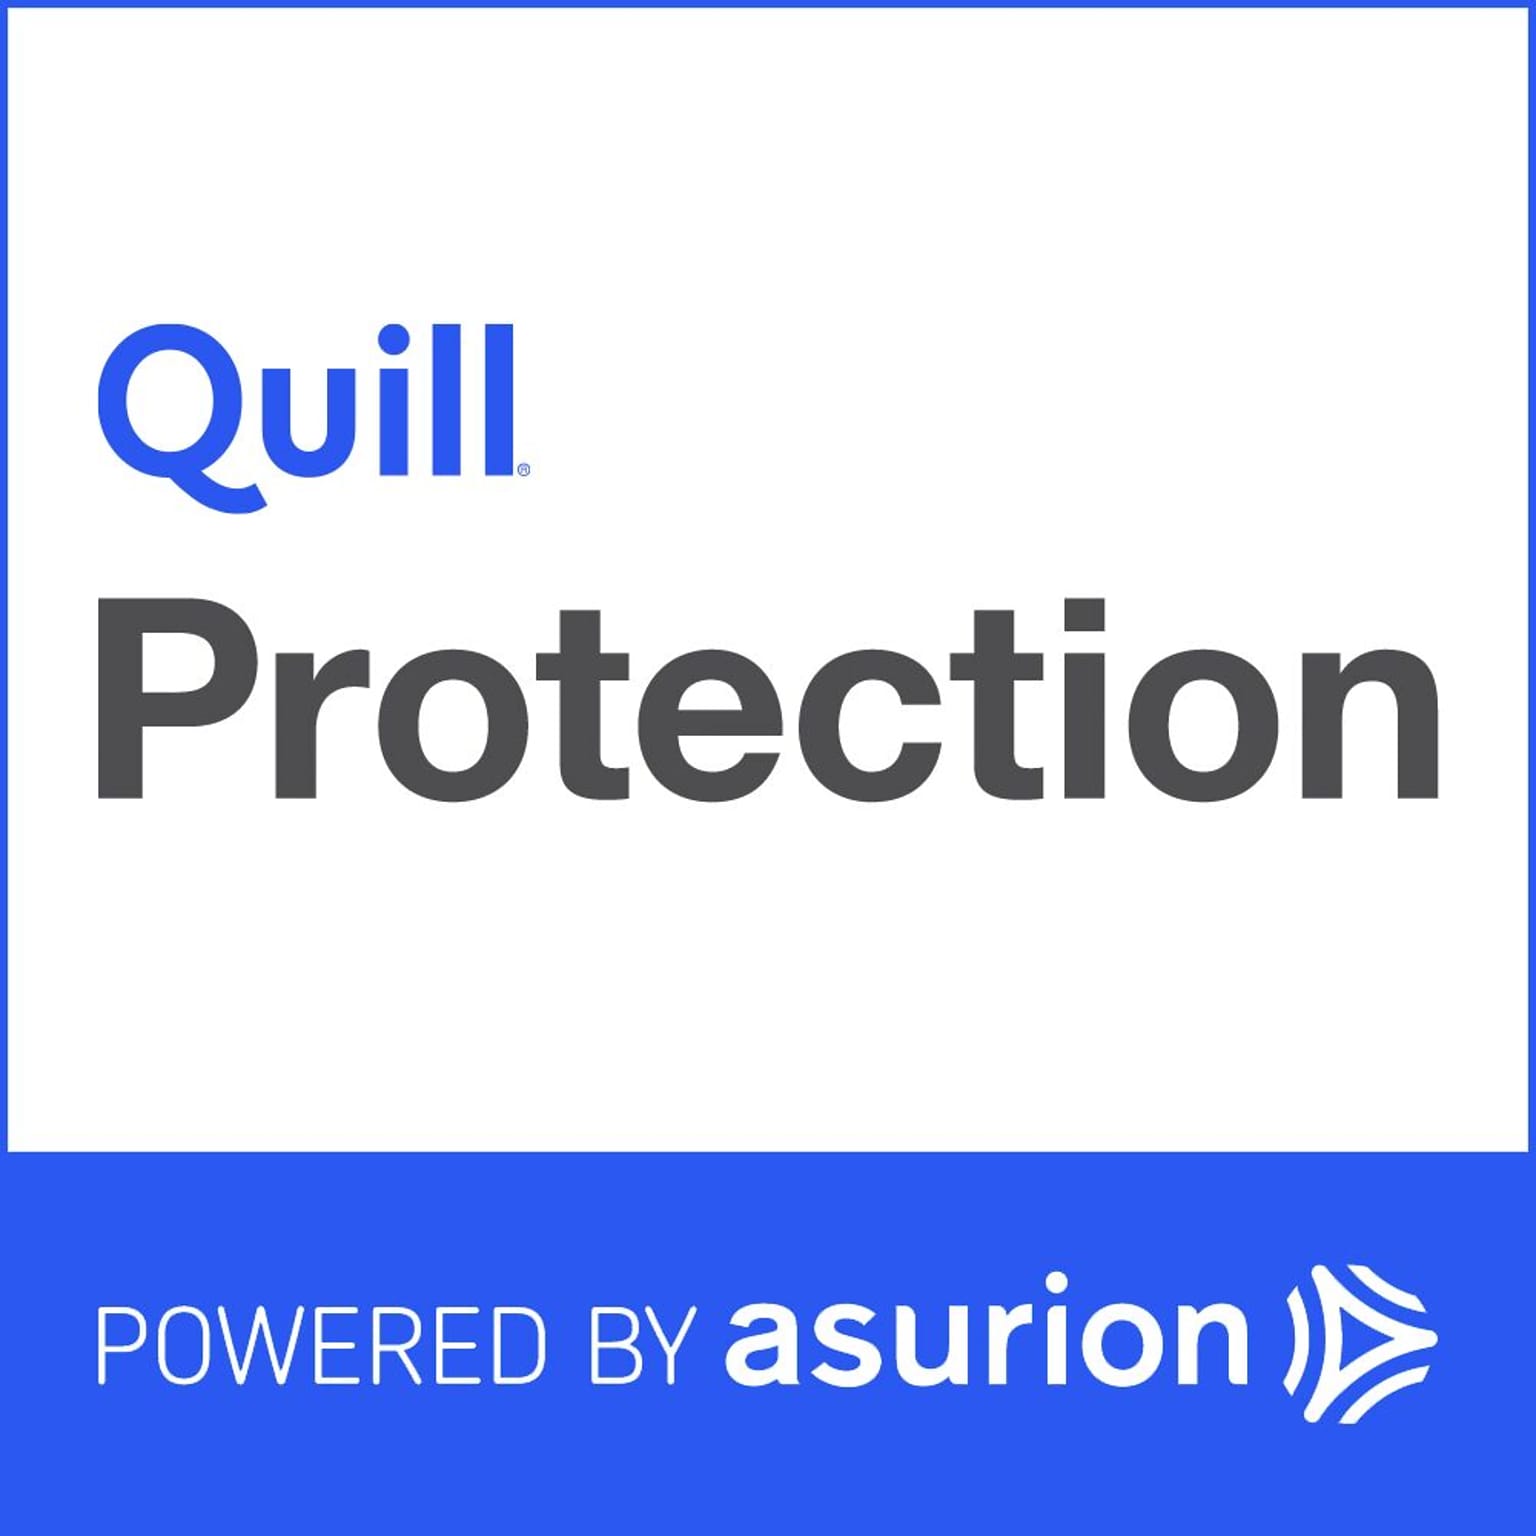 Quill.com 2 Year Protection Plan $0-$29.99